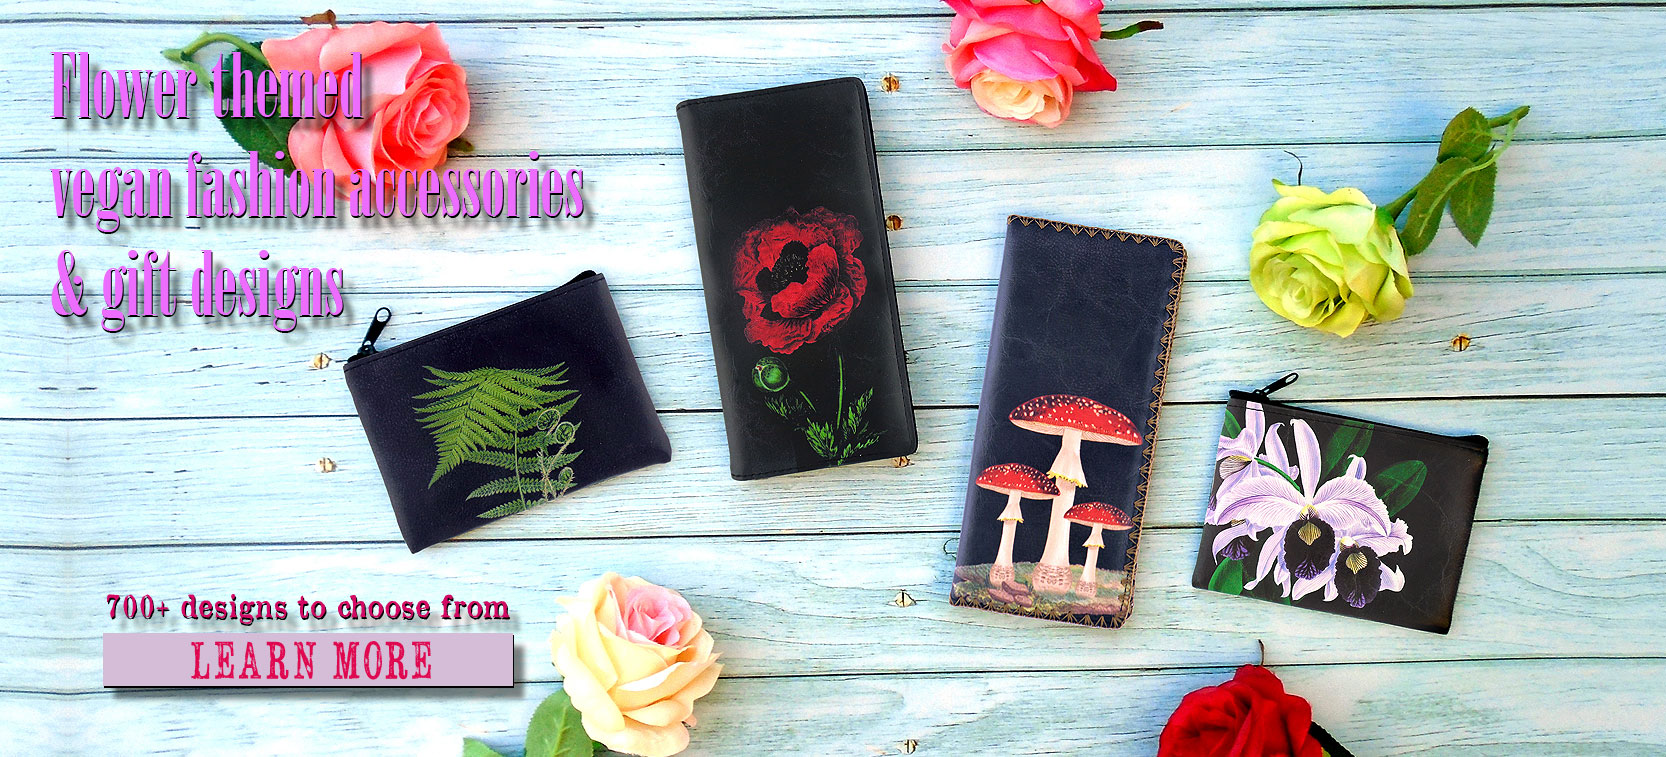 LAVISHY design and wholesale flower themed vegan bags, wallets and accessories to gift shops, boutiques and book shops, souvenir stores in Canada, USA and worldwide.